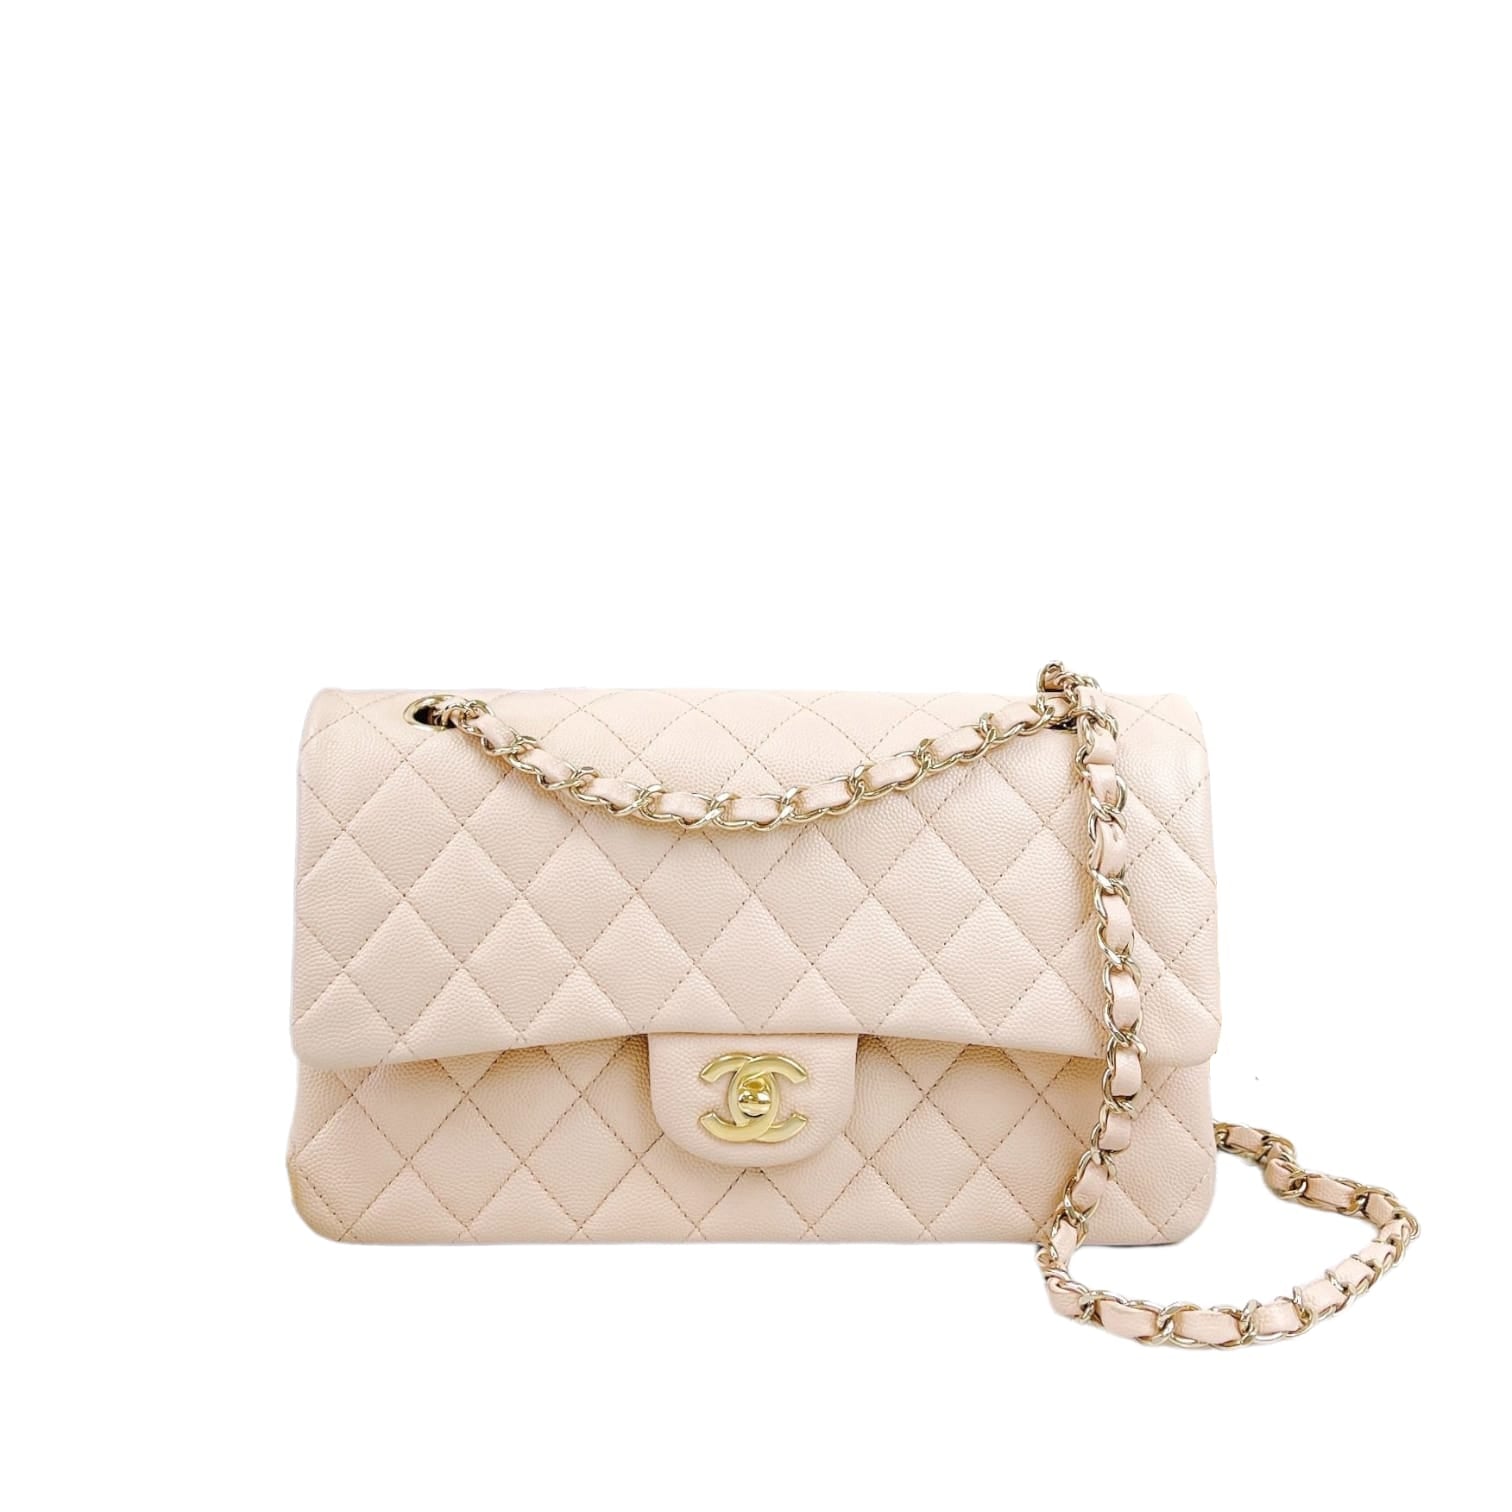 Chanel Classic Jumbo Double Flap 20C Light Beige / Ivory Caviar Leather,  Gold Hardware, Preowned in Box - Julia Rose Boston